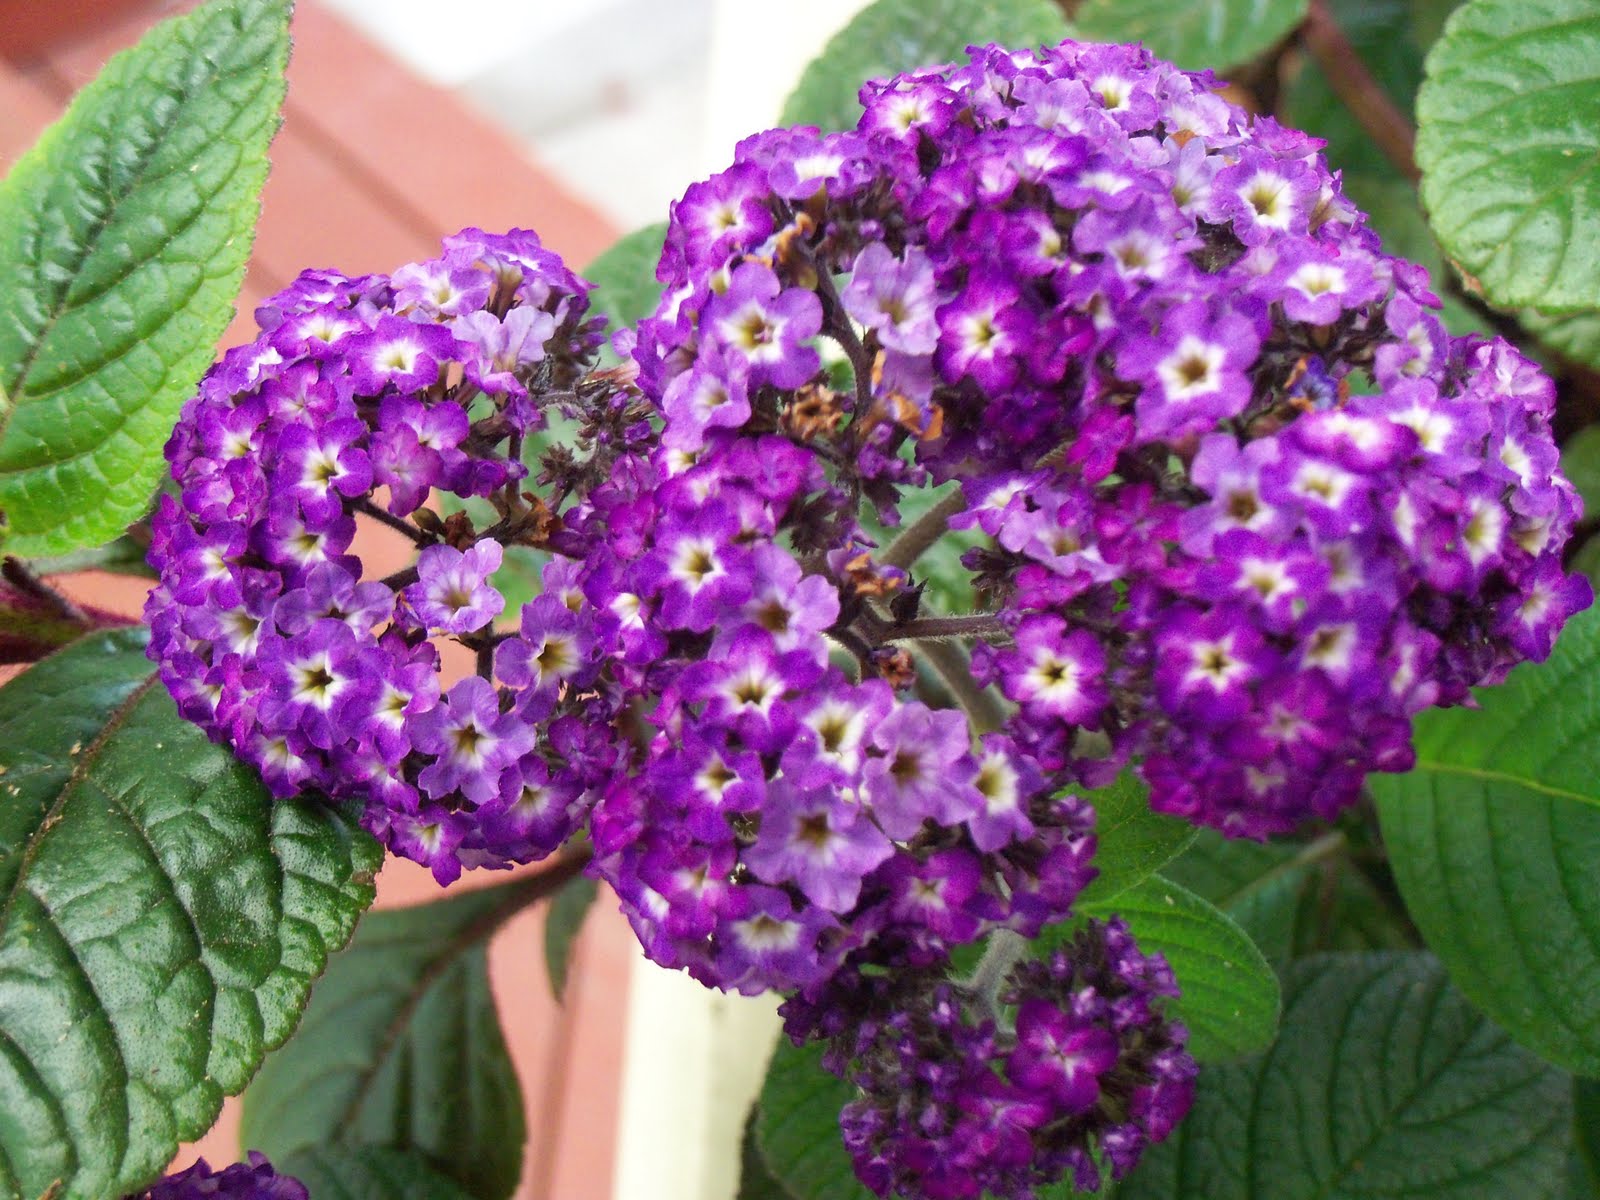 Also known as cherry pie plant for the sweet cherry-like scent, the heliotrope flower is attractive to hummingbirds, butterflies, and other insect pollinators.